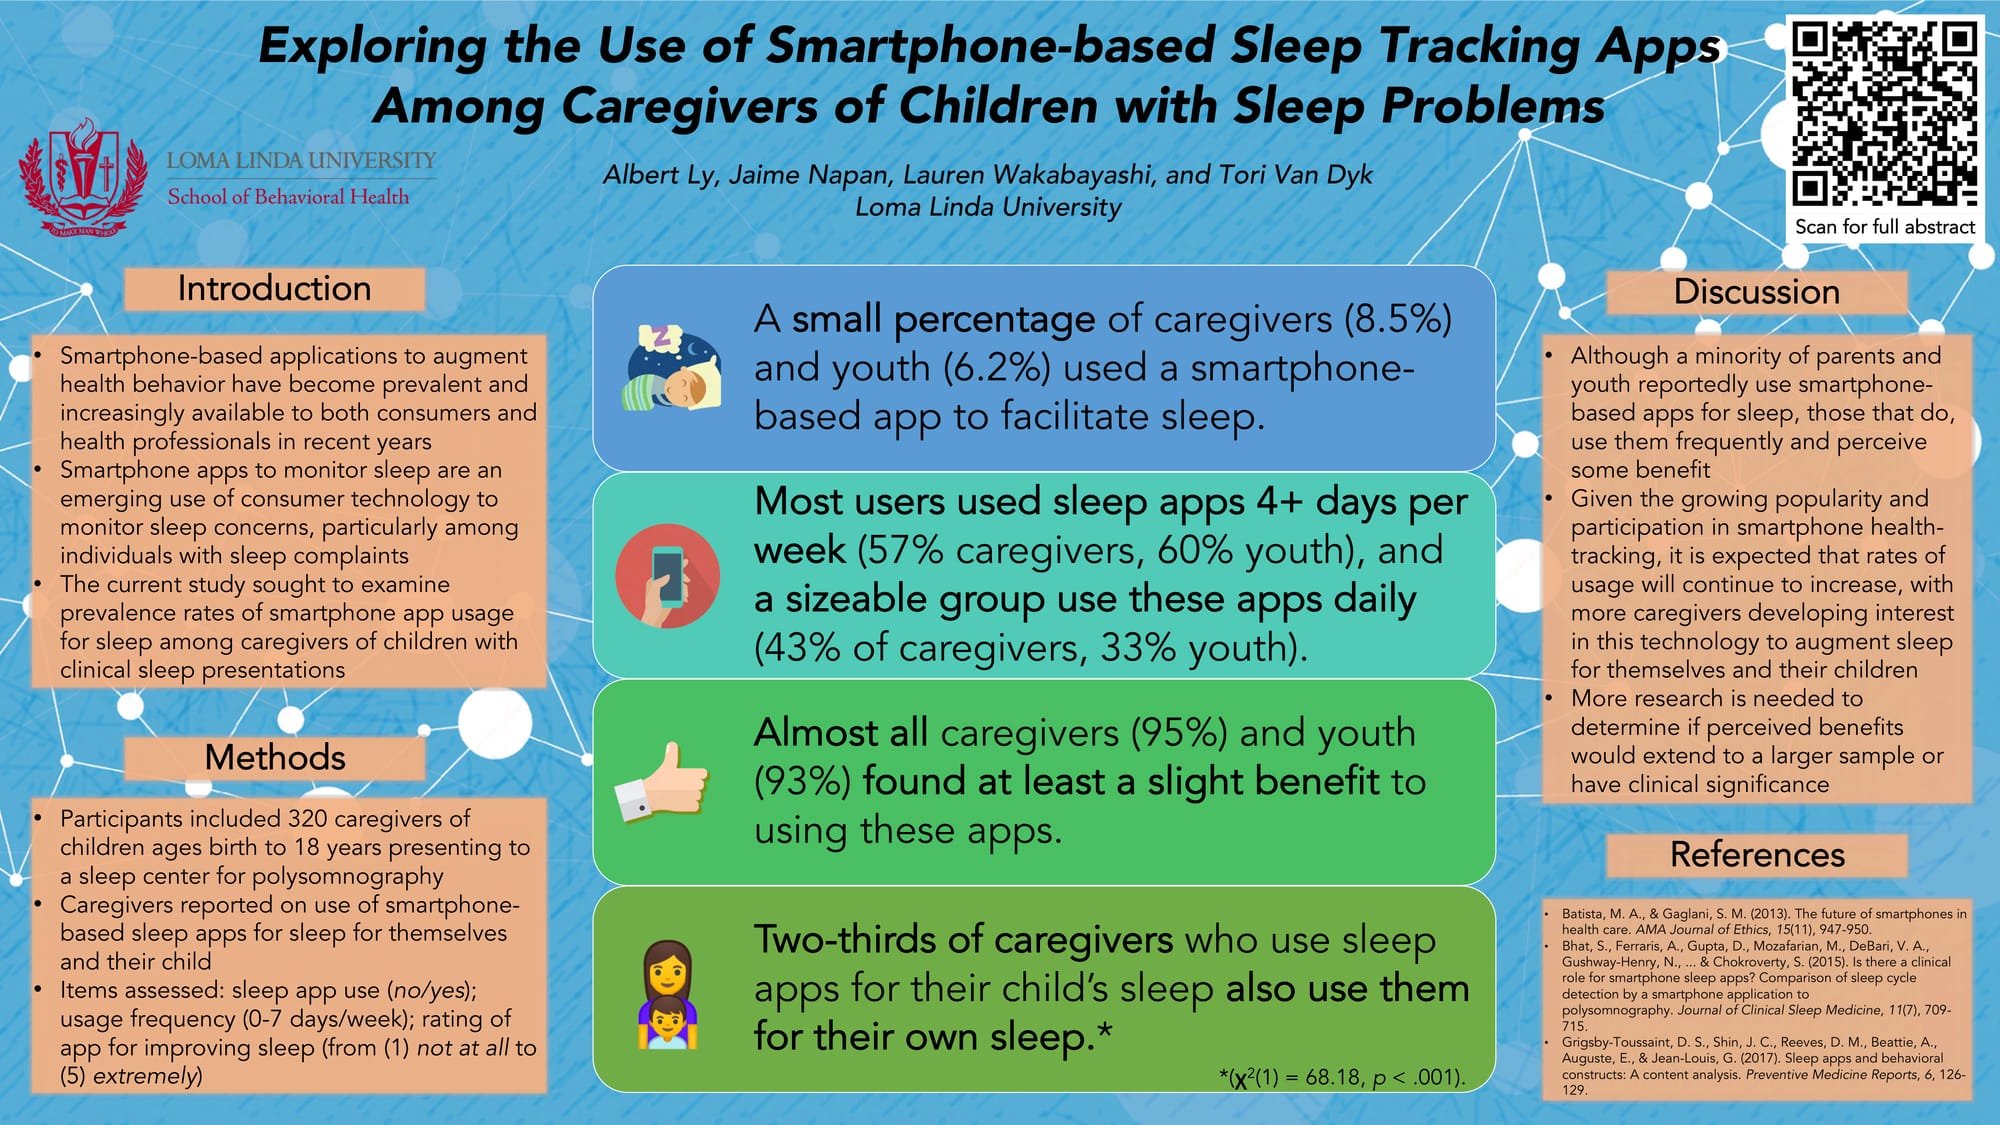 Exploring the Use of Smartphone-based Sleep Tracking Apps Among Caregivers of Children with Sleep Problems.